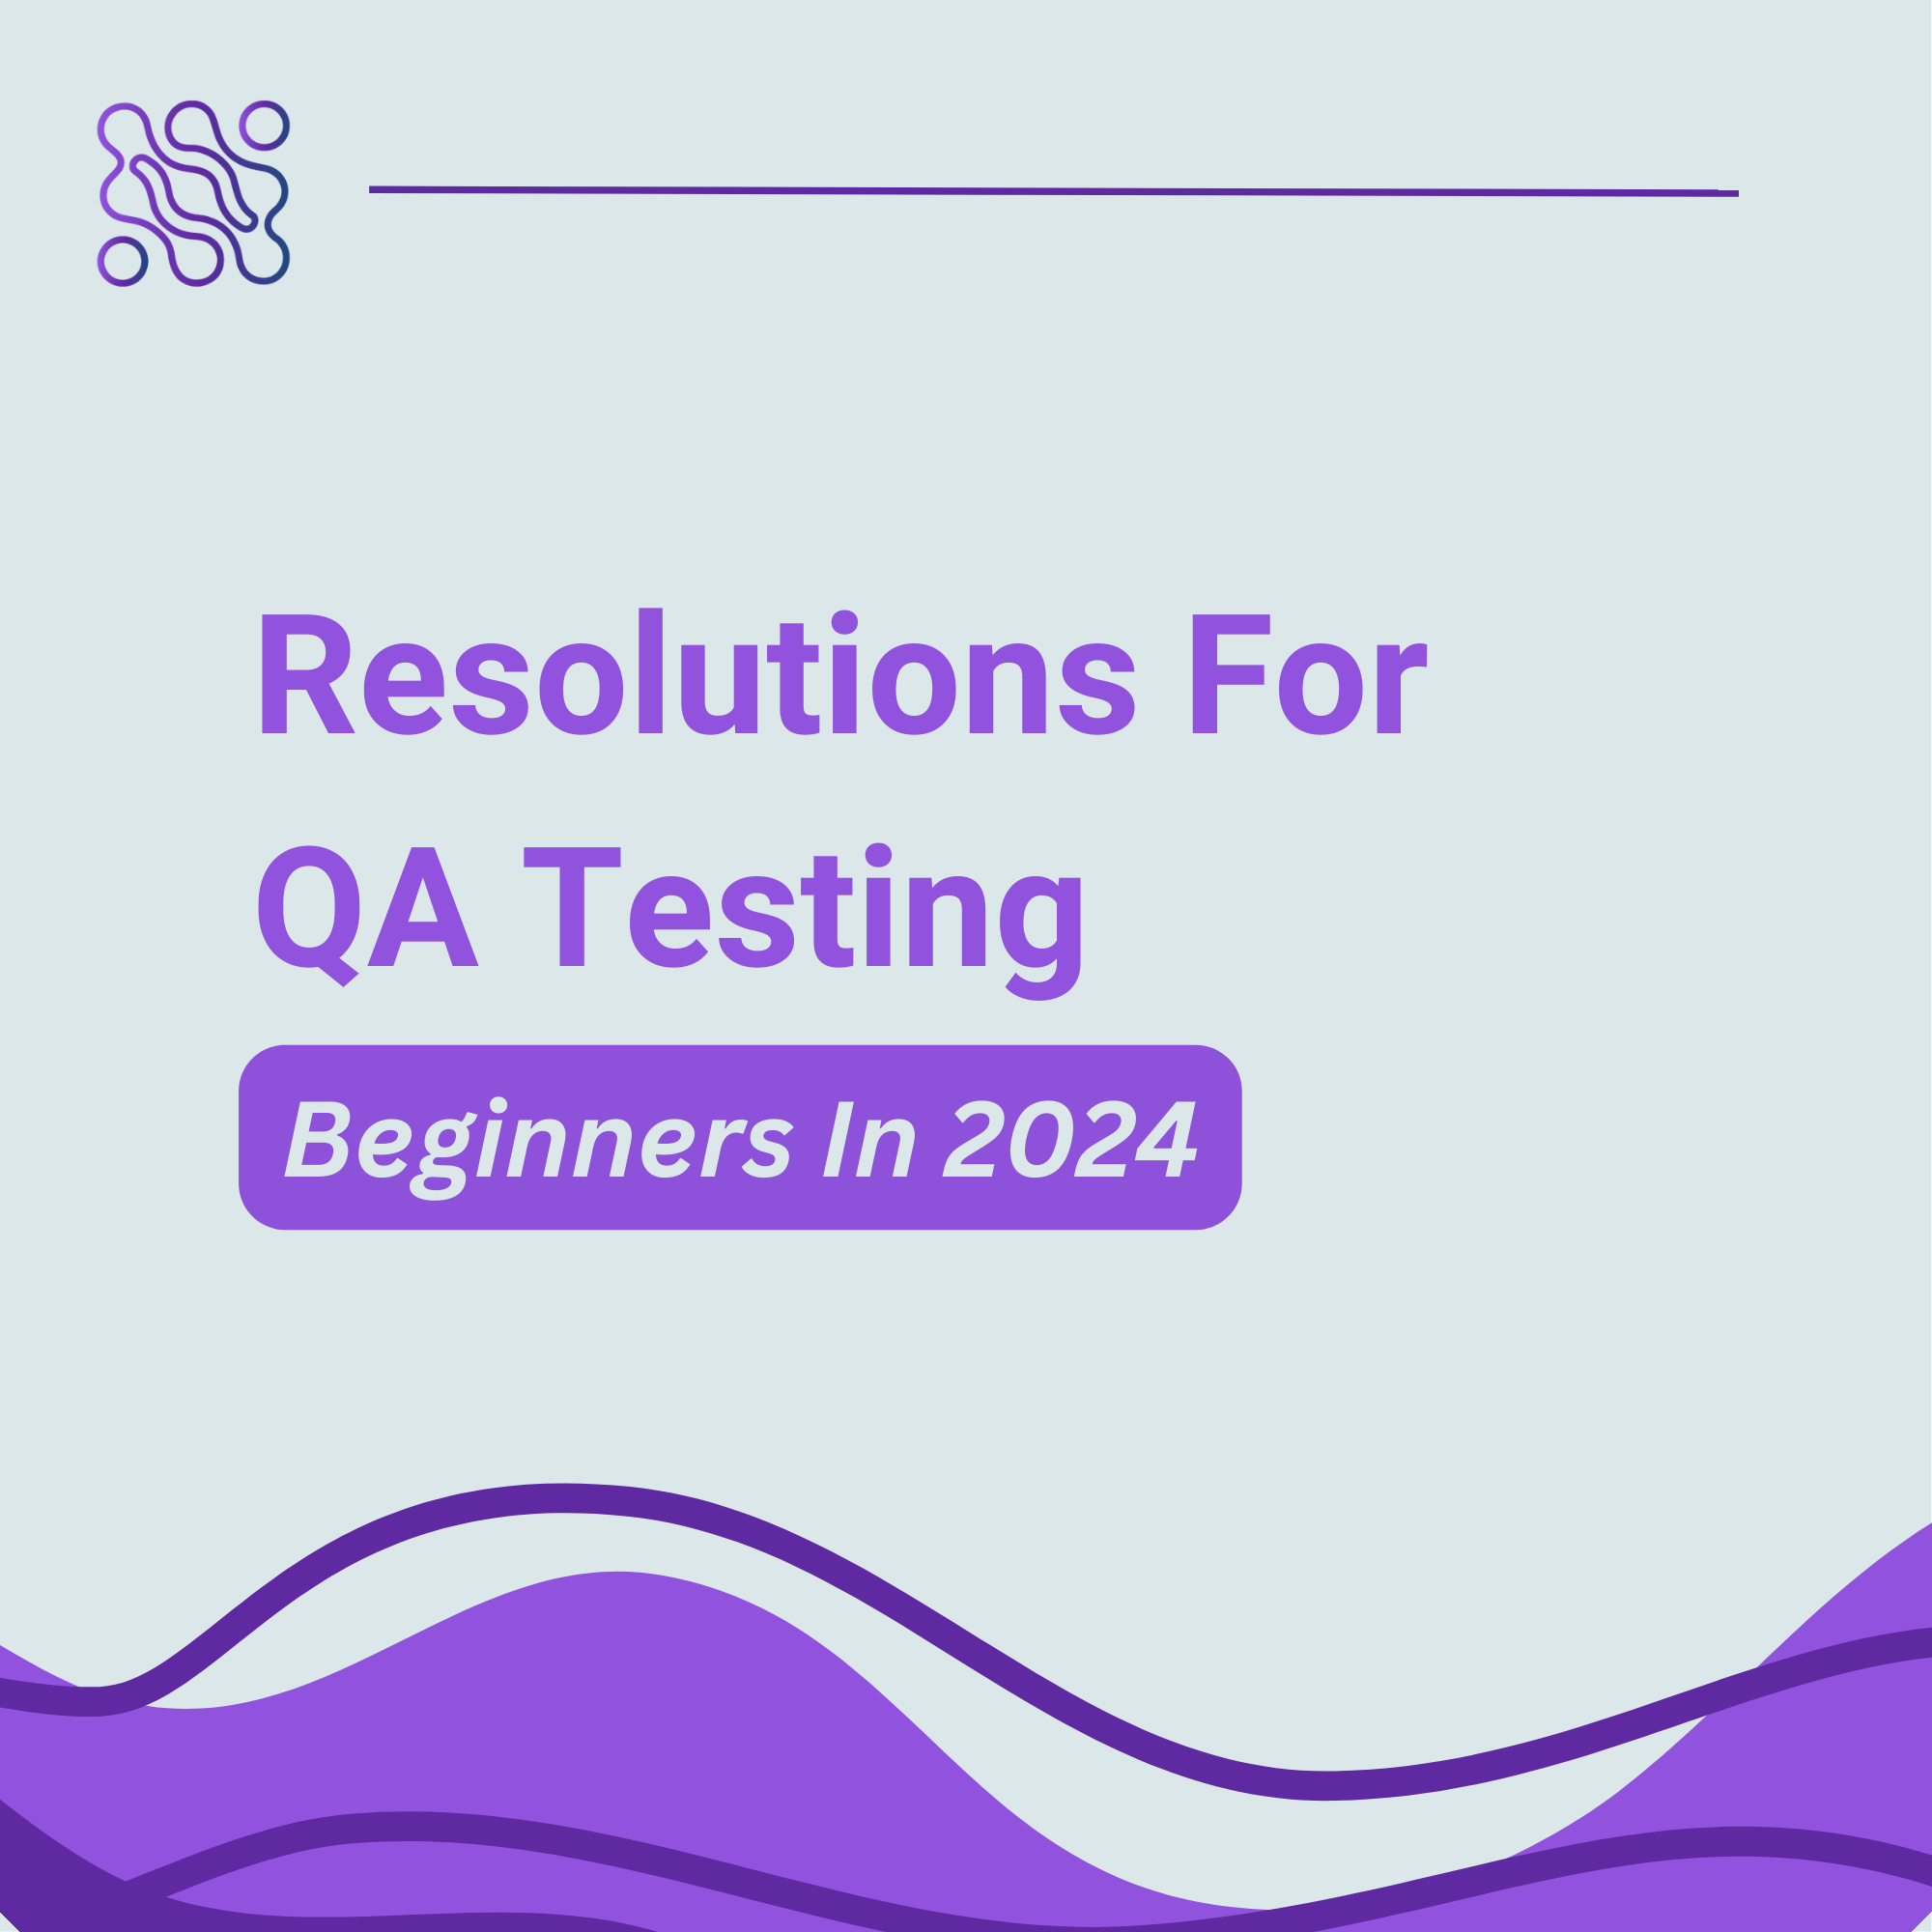 Resolutions for QA testing beginners in 2024